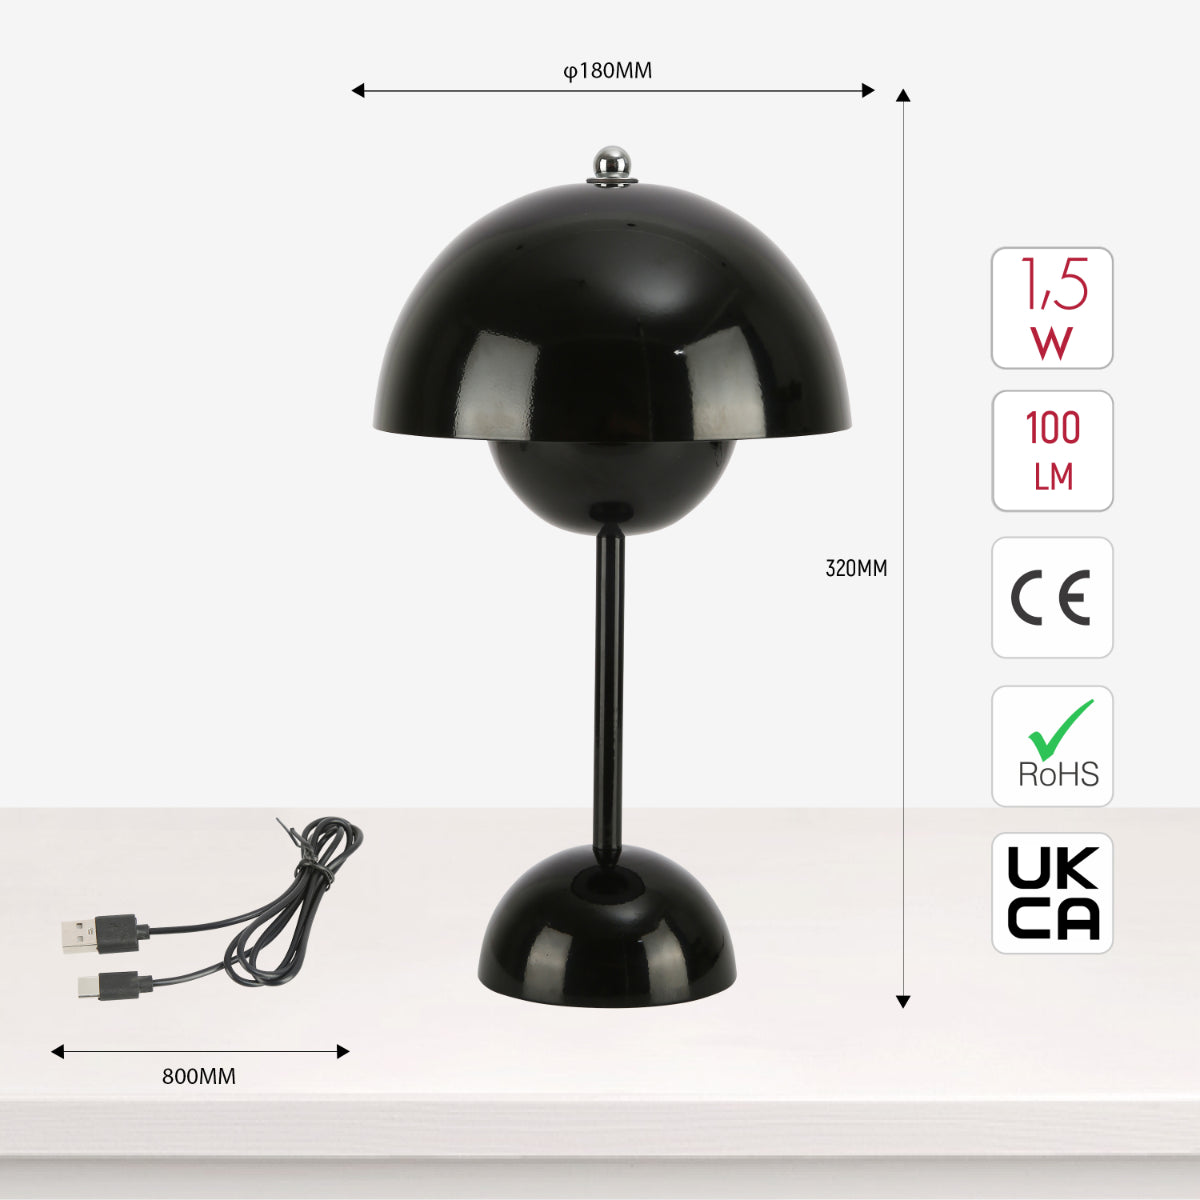 Size and certifications of Spherical Harmony LED Table Lamp – Dual-Color Elegance 130-03732